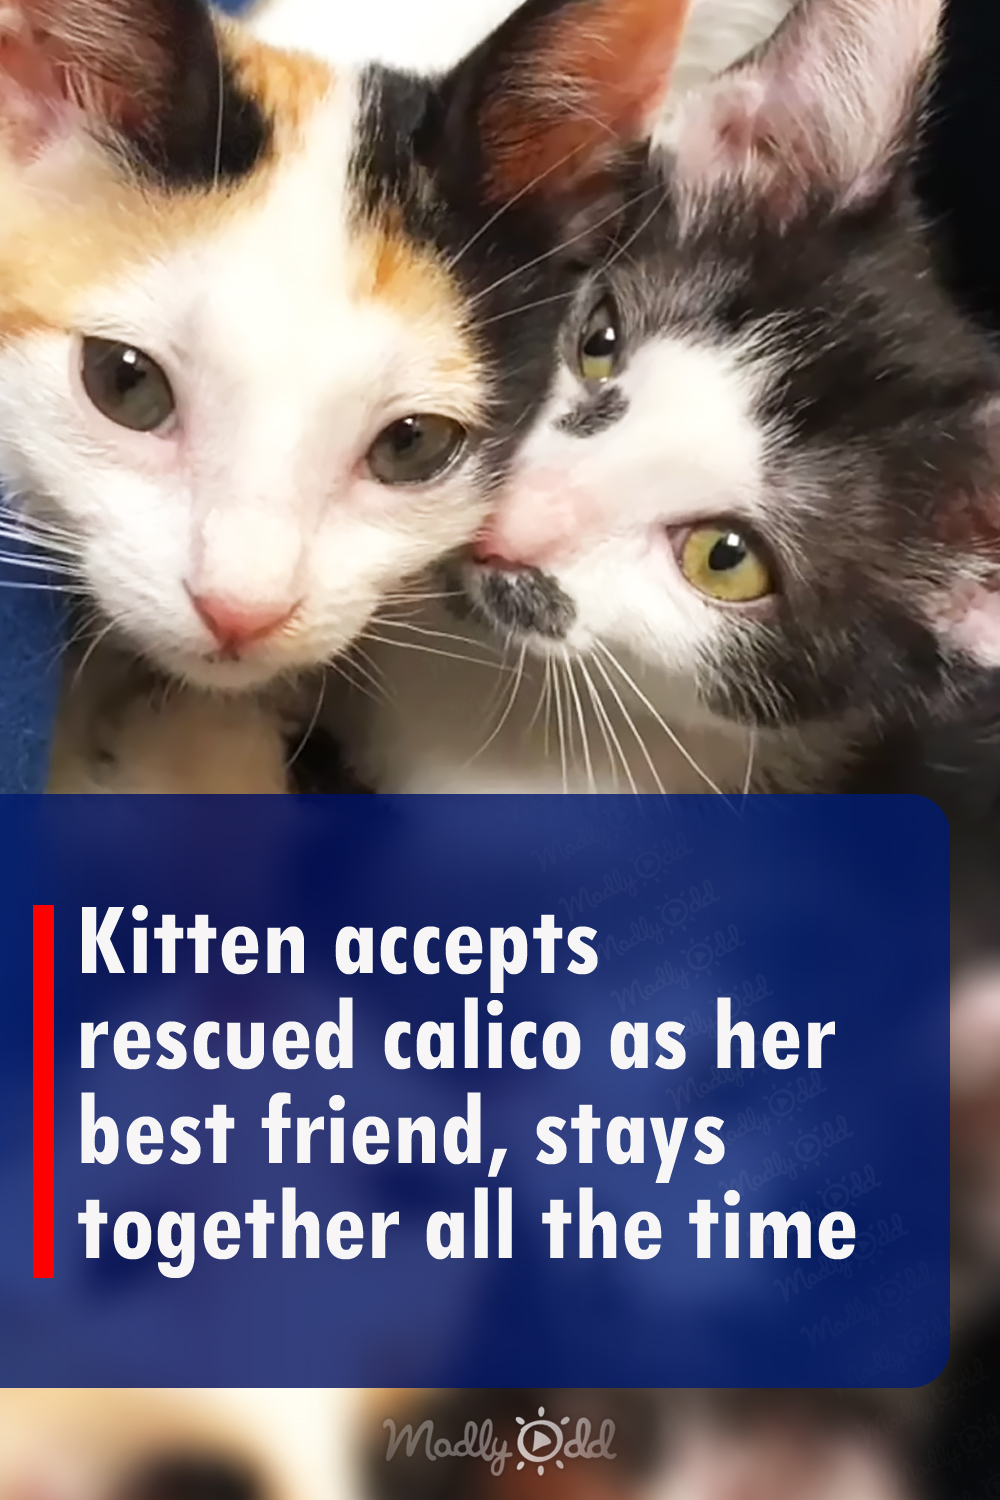 Kitten accepts rescued calico as her best friend, stays together all the time